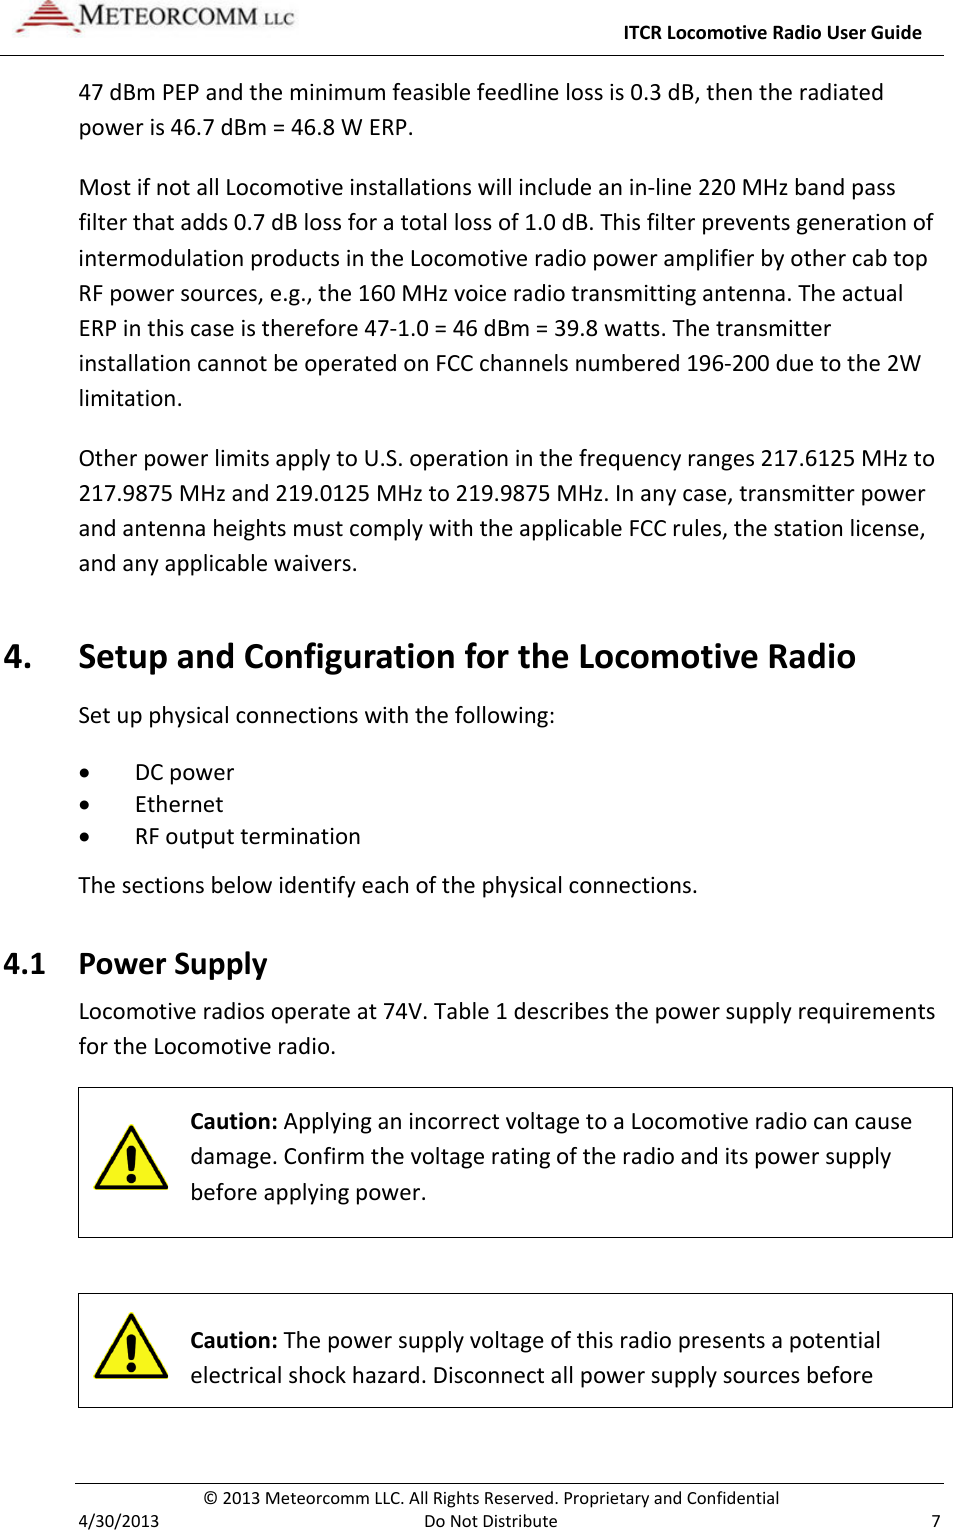     ITCR Locomotive Radio User Guide  © 2013 Meteorcomm LLC. All Rights Reserved. Proprietary and Confidential   4/30/2013  Do Not Distribute  7 47 dBm PEP and the minimum feasible feedline loss is 0.3 dB, then the radiated power is 46.7 dBm = 46.8 W ERP.  Most if not all Locomotive installations will include an in-line 220 MHz band pass filter that adds 0.7 dB loss for a total loss of 1.0 dB. This filter prevents generation of intermodulation products in the Locomotive radio power amplifier by other cab top RF power sources, e.g., the 160 MHz voice radio transmitting antenna. The actual ERP in this case is therefore 47-1.0 = 46 dBm = 39.8 watts. The transmitter installation cannot be operated on FCC channels numbered 196-200 due to the 2W limitation. Other power limits apply to U.S. operation in the frequency ranges 217.6125 MHz to 217.9875 MHz and 219.0125 MHz to 219.9875 MHz. In any case, transmitter power and antenna heights must comply with the applicable FCC rules, the station license, and any applicable waivers. 4. Setup and Configuration for the Locomotive Radio Set up physical connections with the following: • DC power • Ethernet • RF output termination The sections below identify each of the physical connections.  4.1 Power Supply Locomotive radios operate at 74V. Table 1 describes the power supply requirements for the Locomotive radio.  Caution: Applying an incorrect voltage to a Locomotive radio can cause damage. Confirm the voltage rating of the radio and its power supply before applying power.    Caution: The power supply voltage of this radio presents a potential electrical shock hazard. Disconnect all power supply sources before 